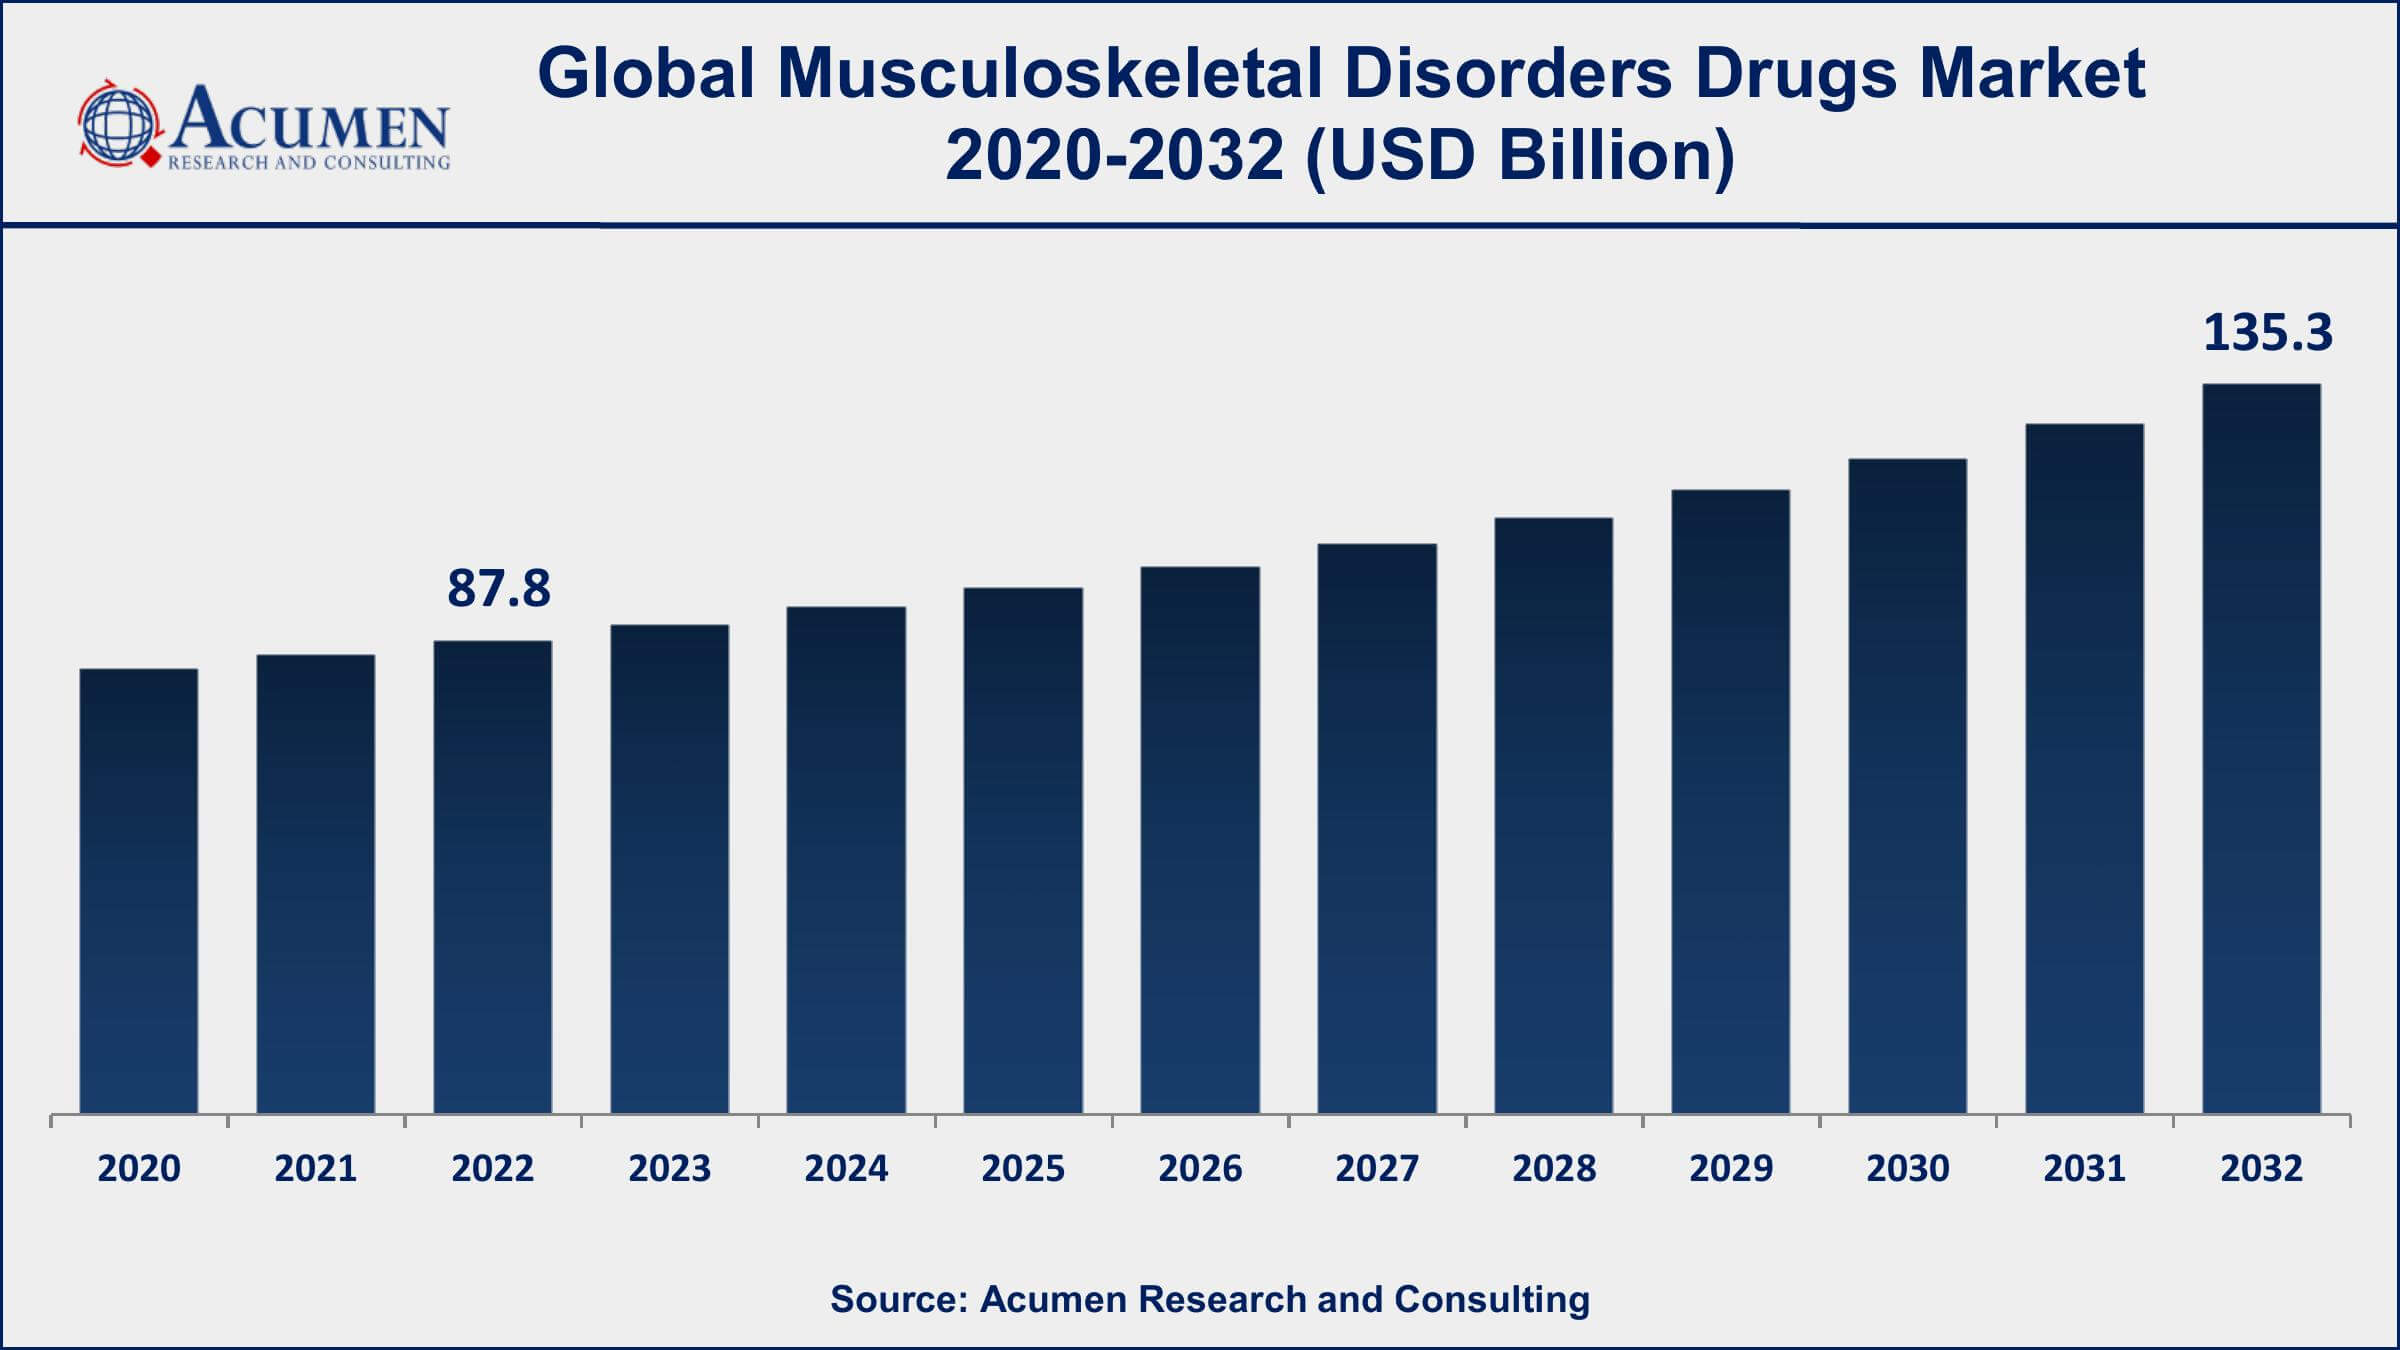 Musculoskeletal Disorders Drugs Market Drivers